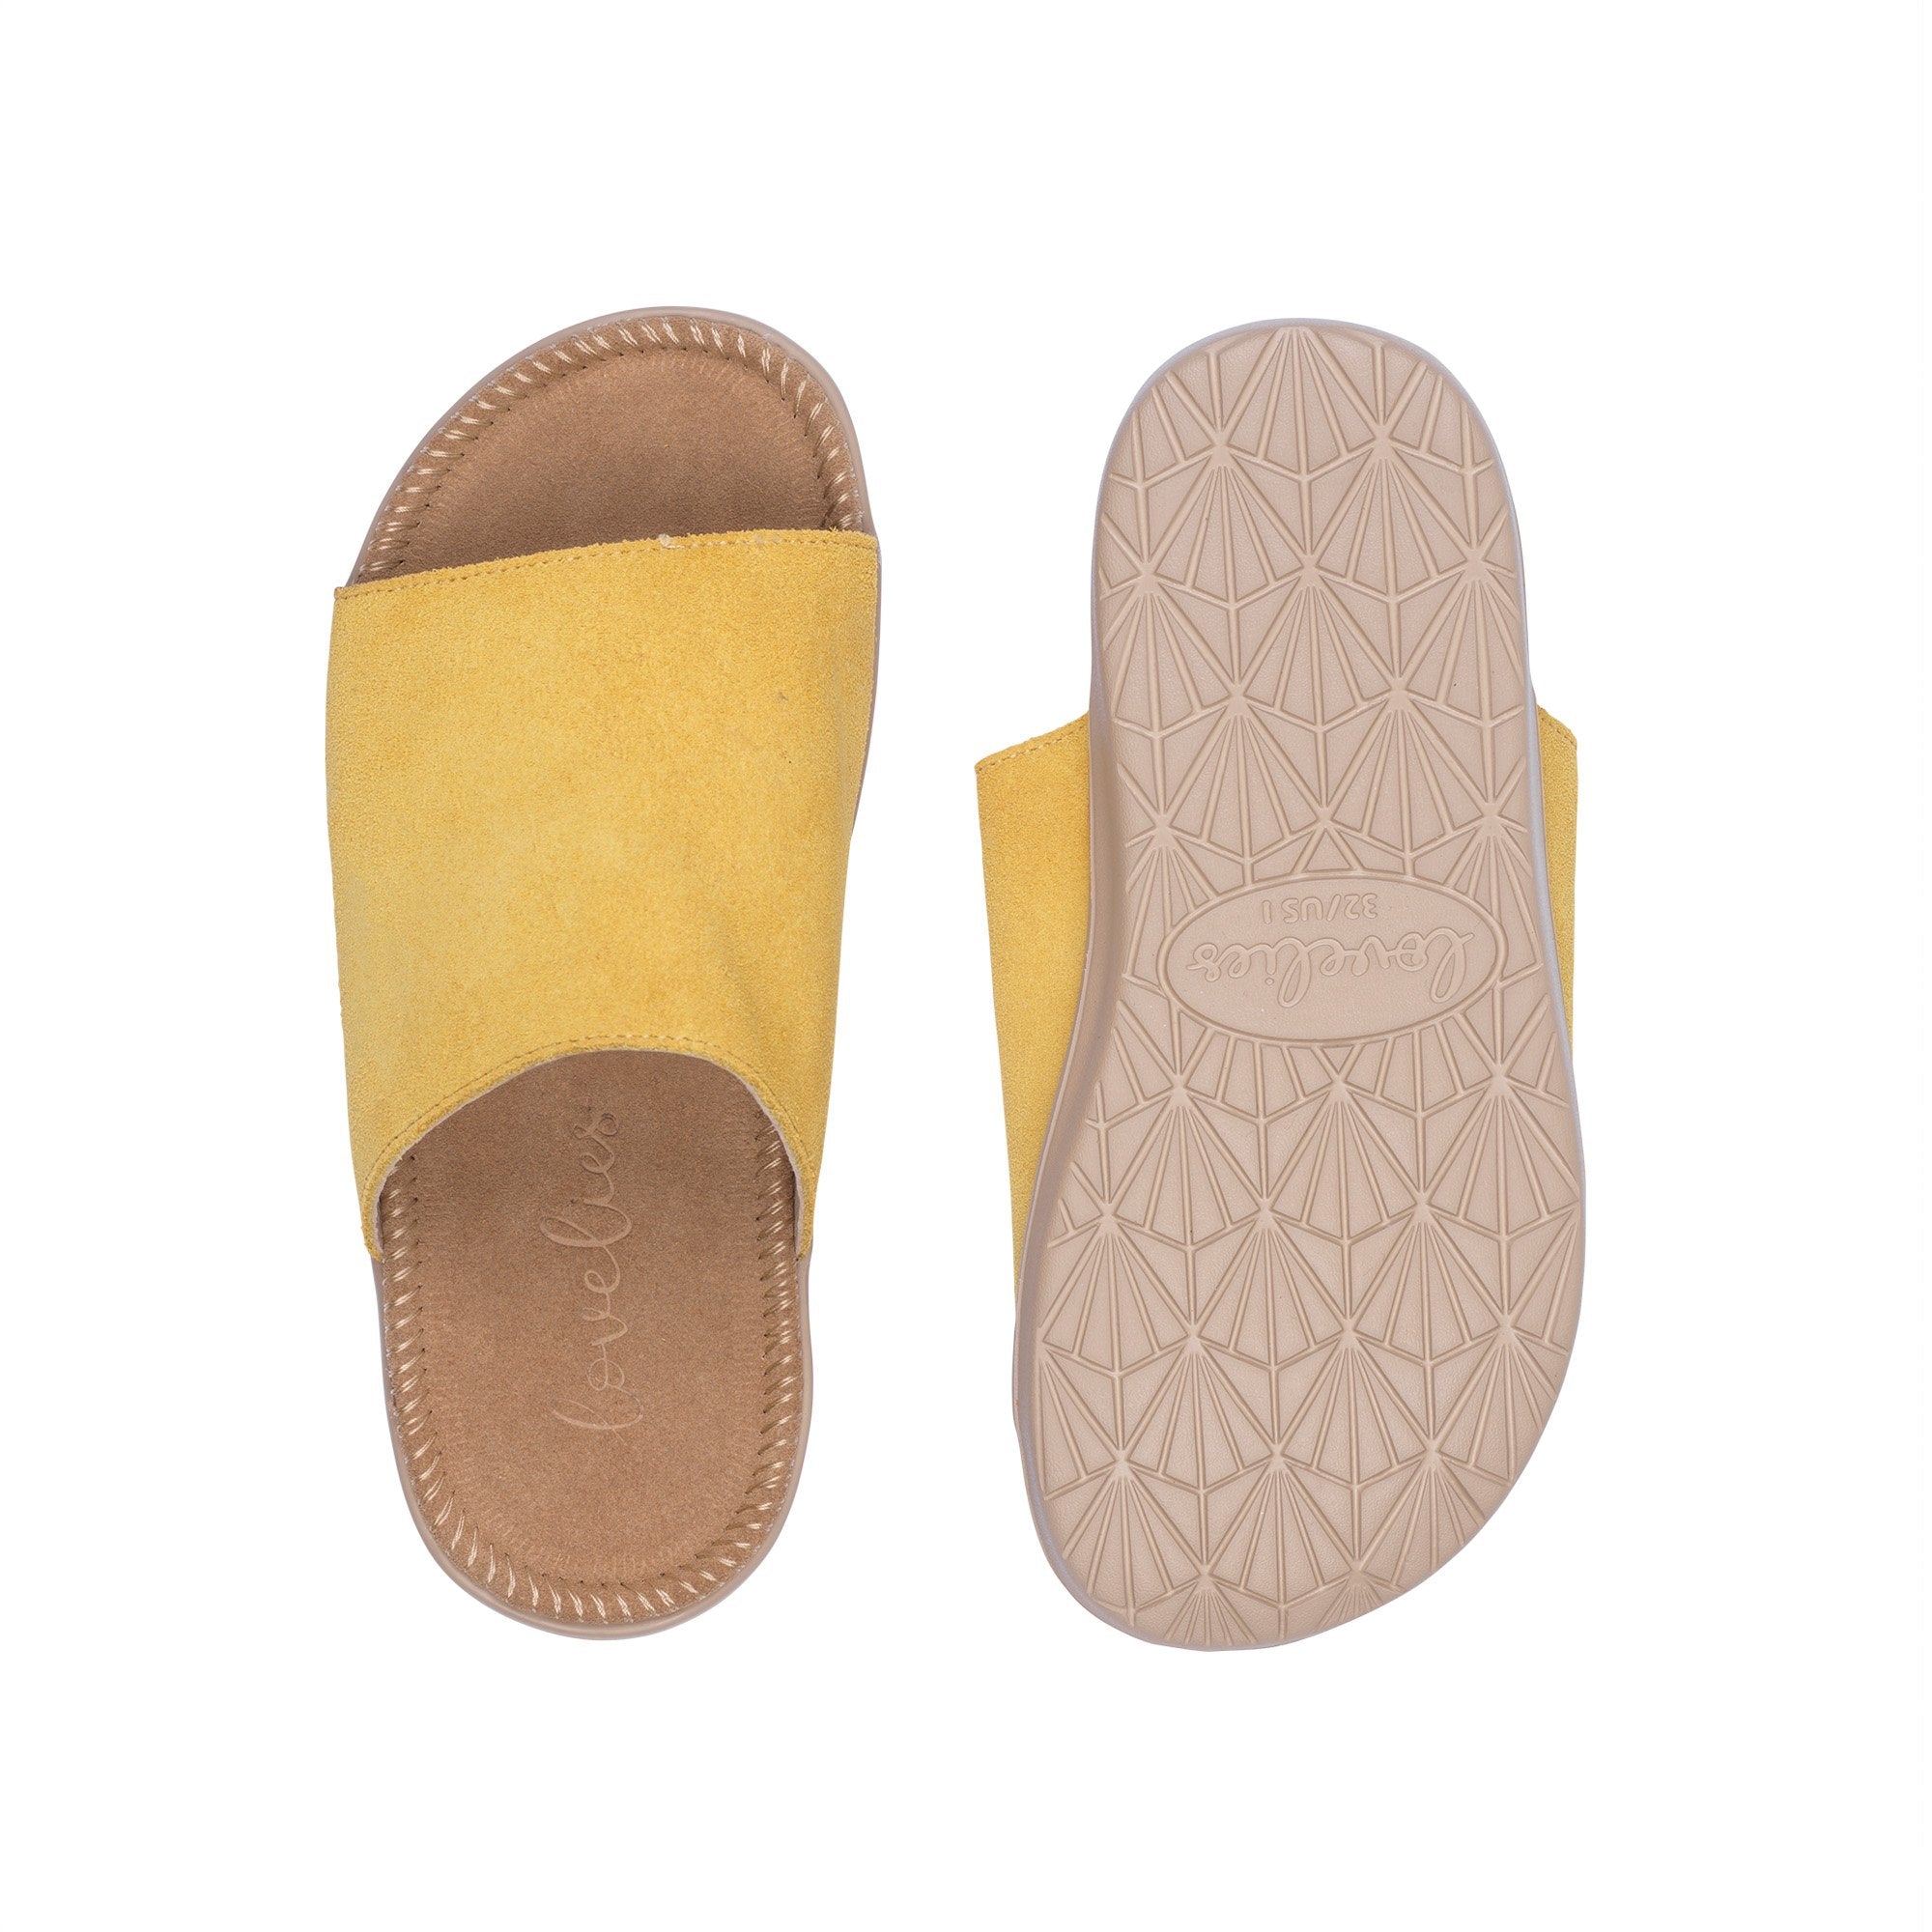 Sandals with straps of soft suede. The comfortable inner sole in covered with suede